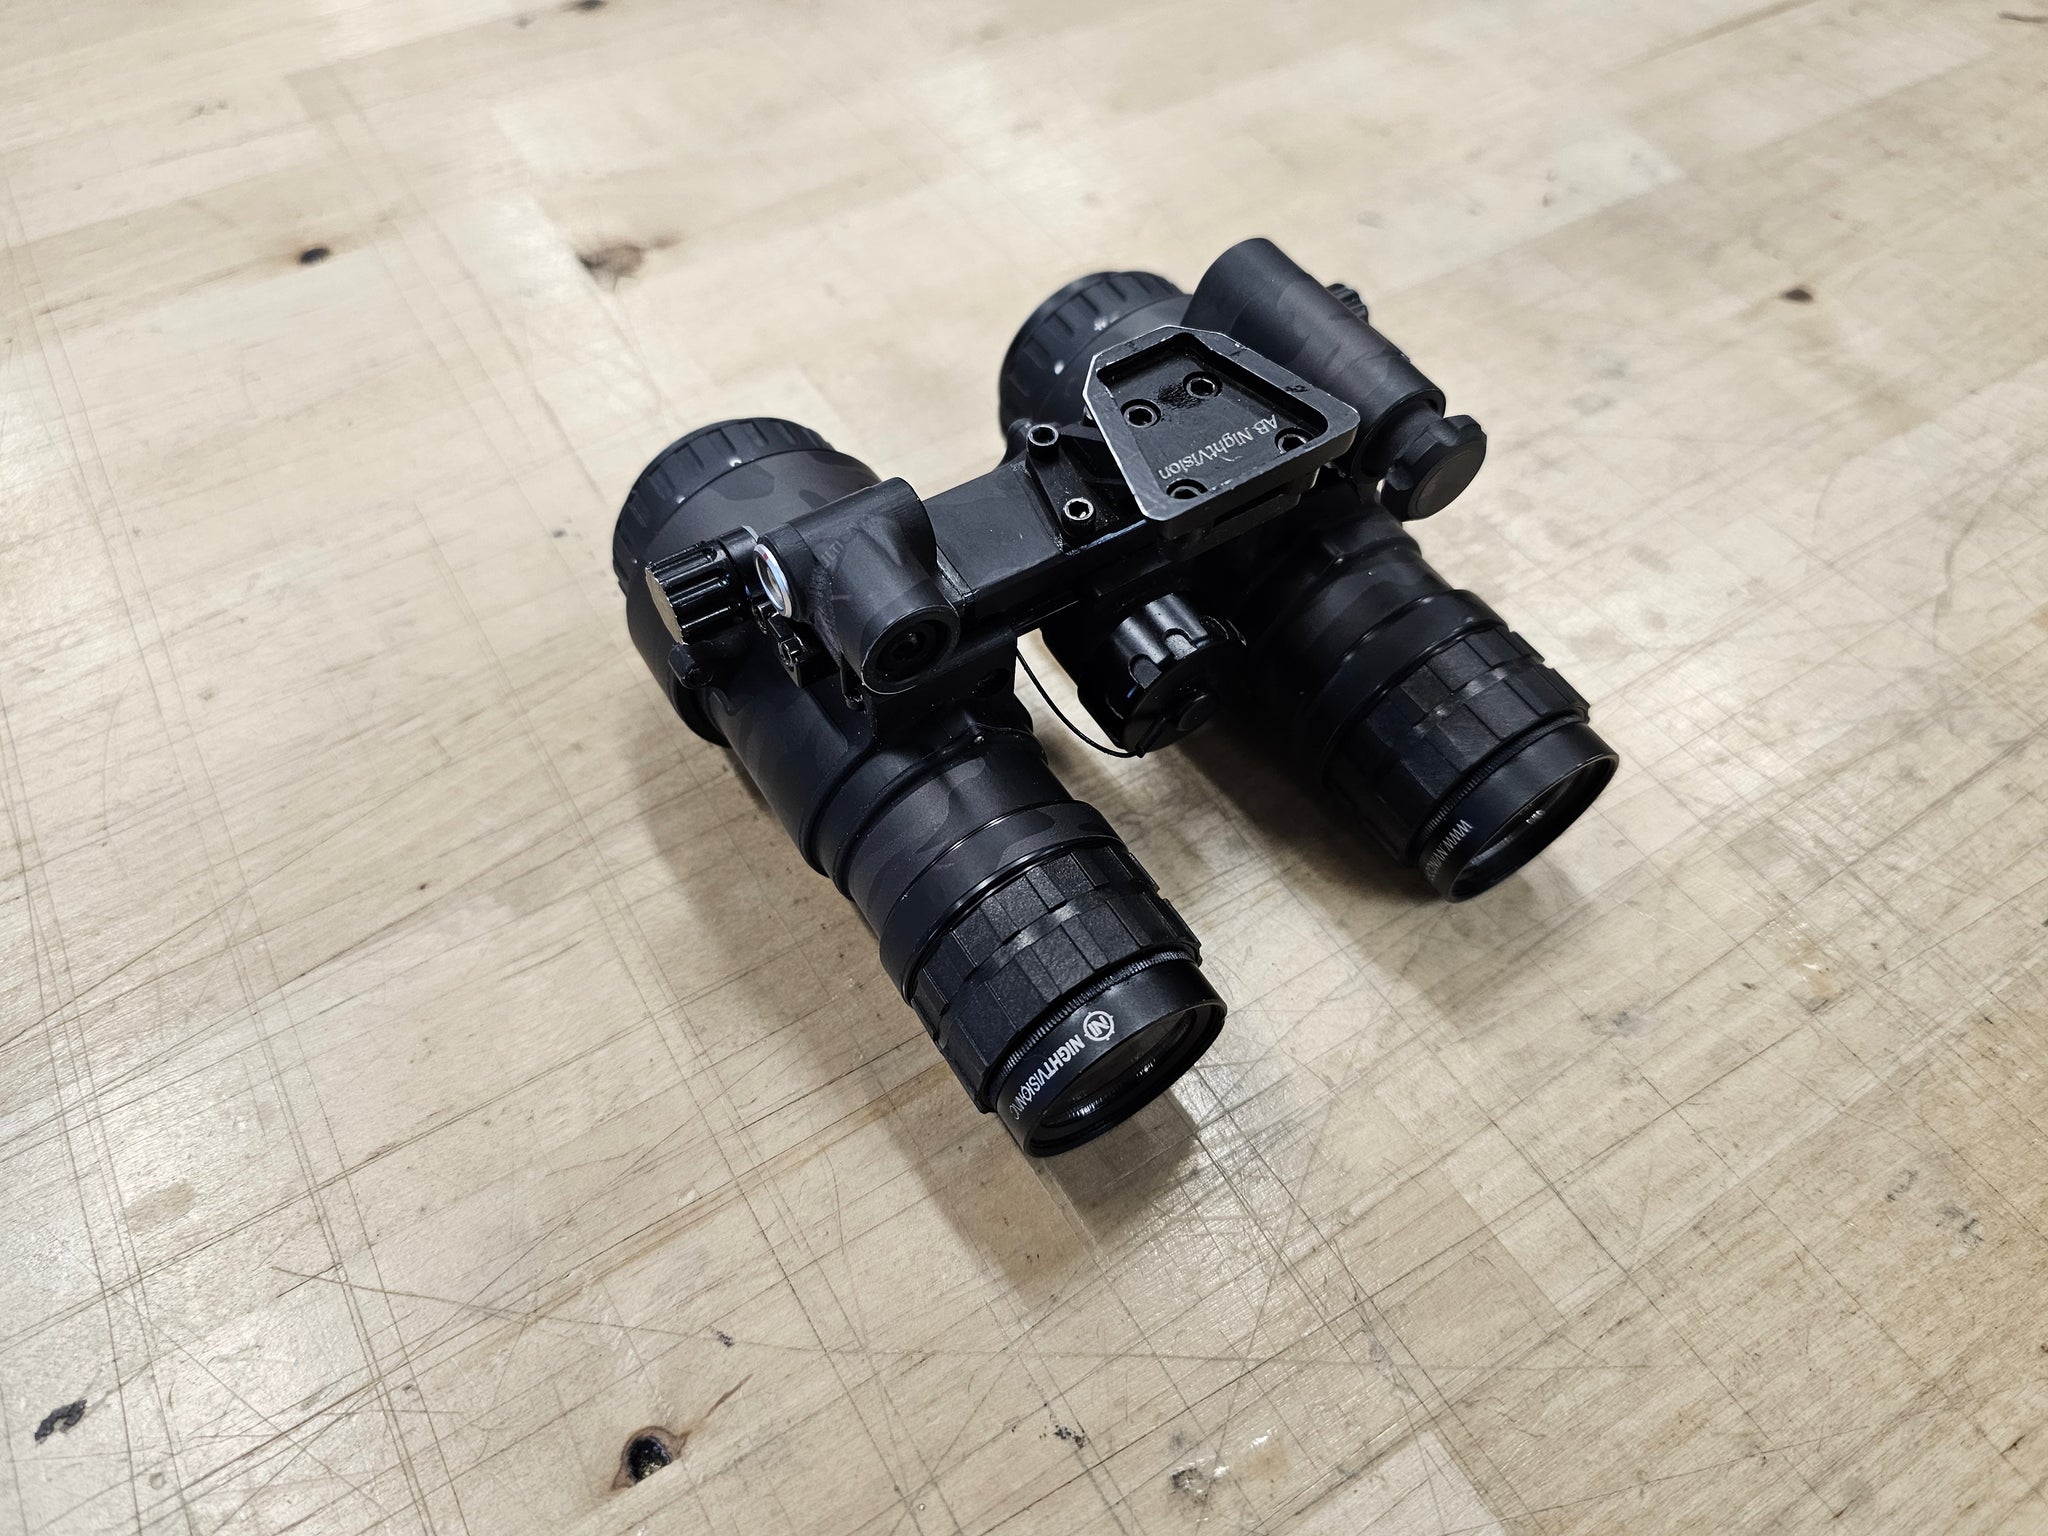 RVNG Housing | AB Rugged Night Vision Goggles for Sale